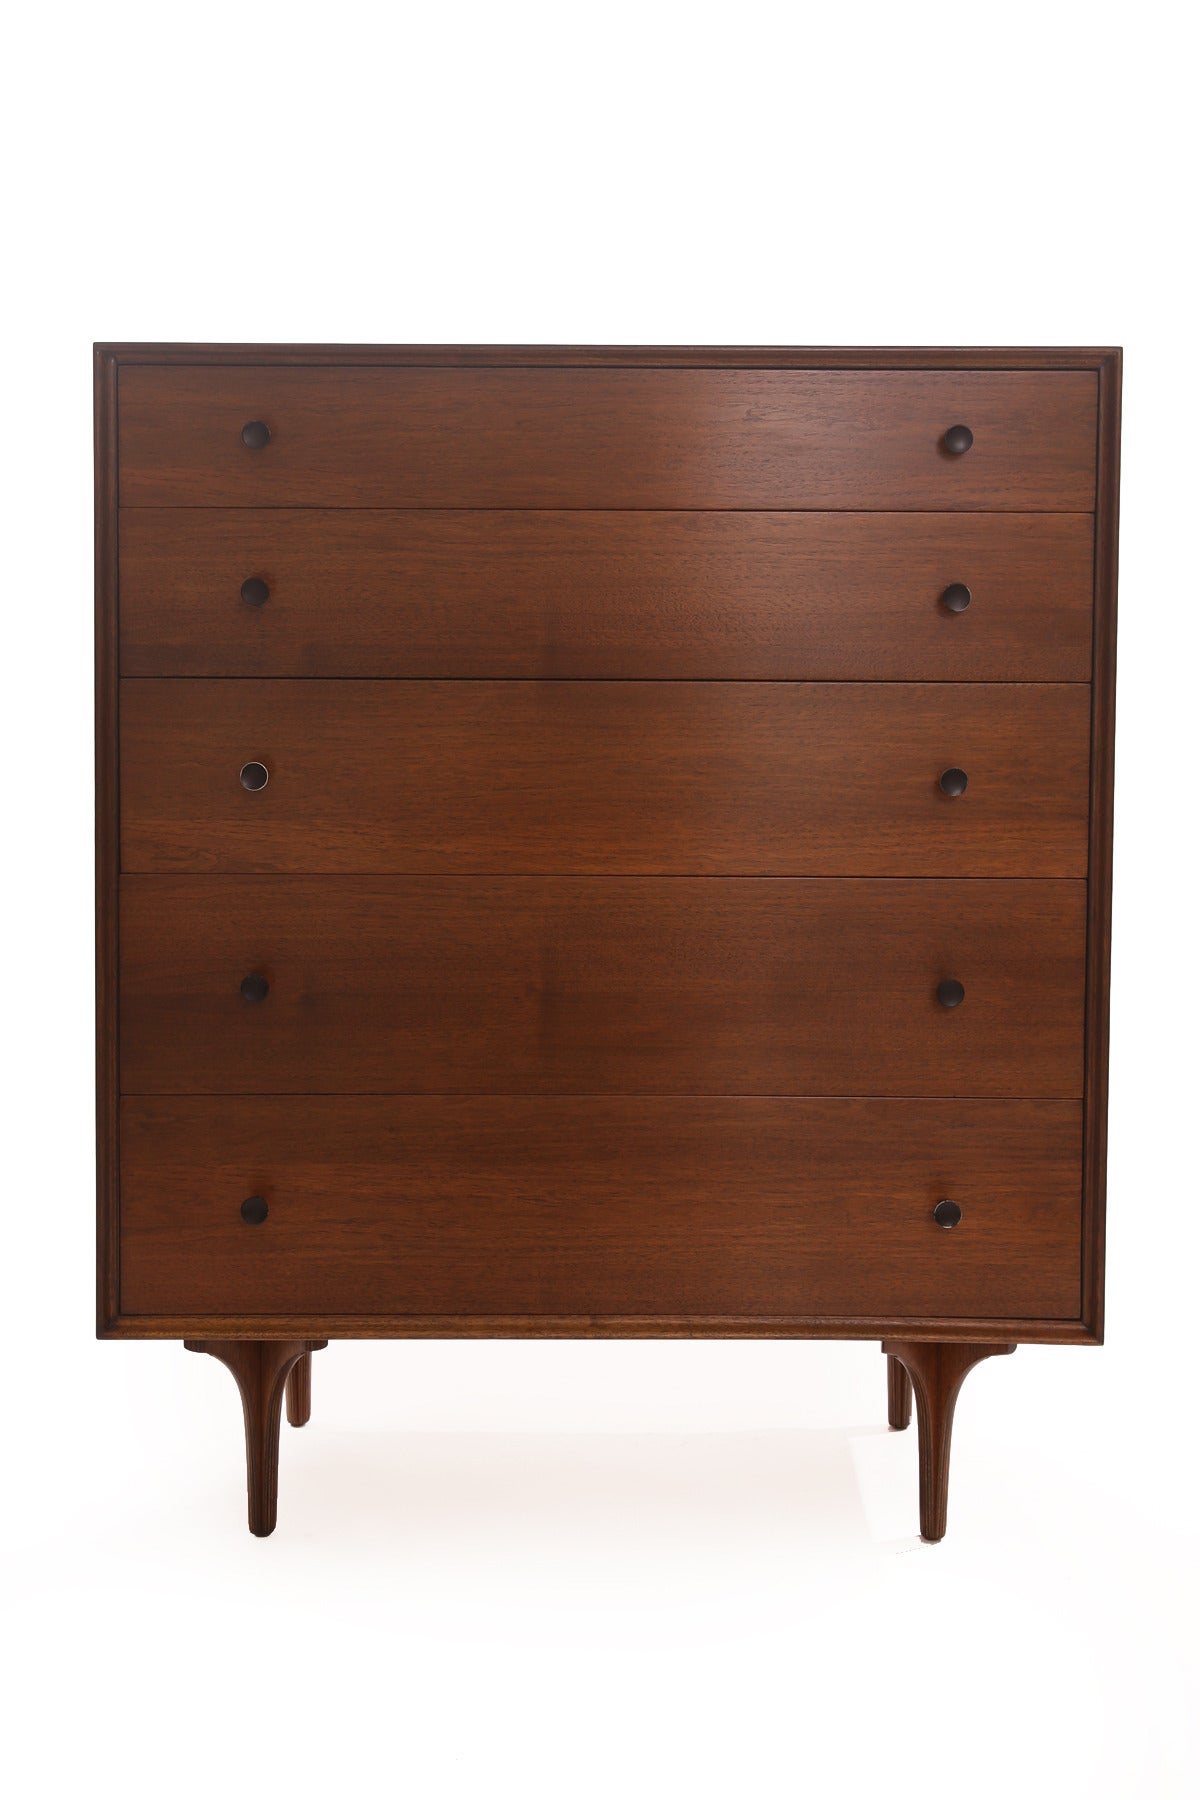 Robert Baron for Glenn of California highboy walnut dresser, circa late 1950s. This lovely example has five drawers spun metal hourglass drawer pulls and fabulous graining to the walnut. Please see Red Modern Furniture's other listings for the